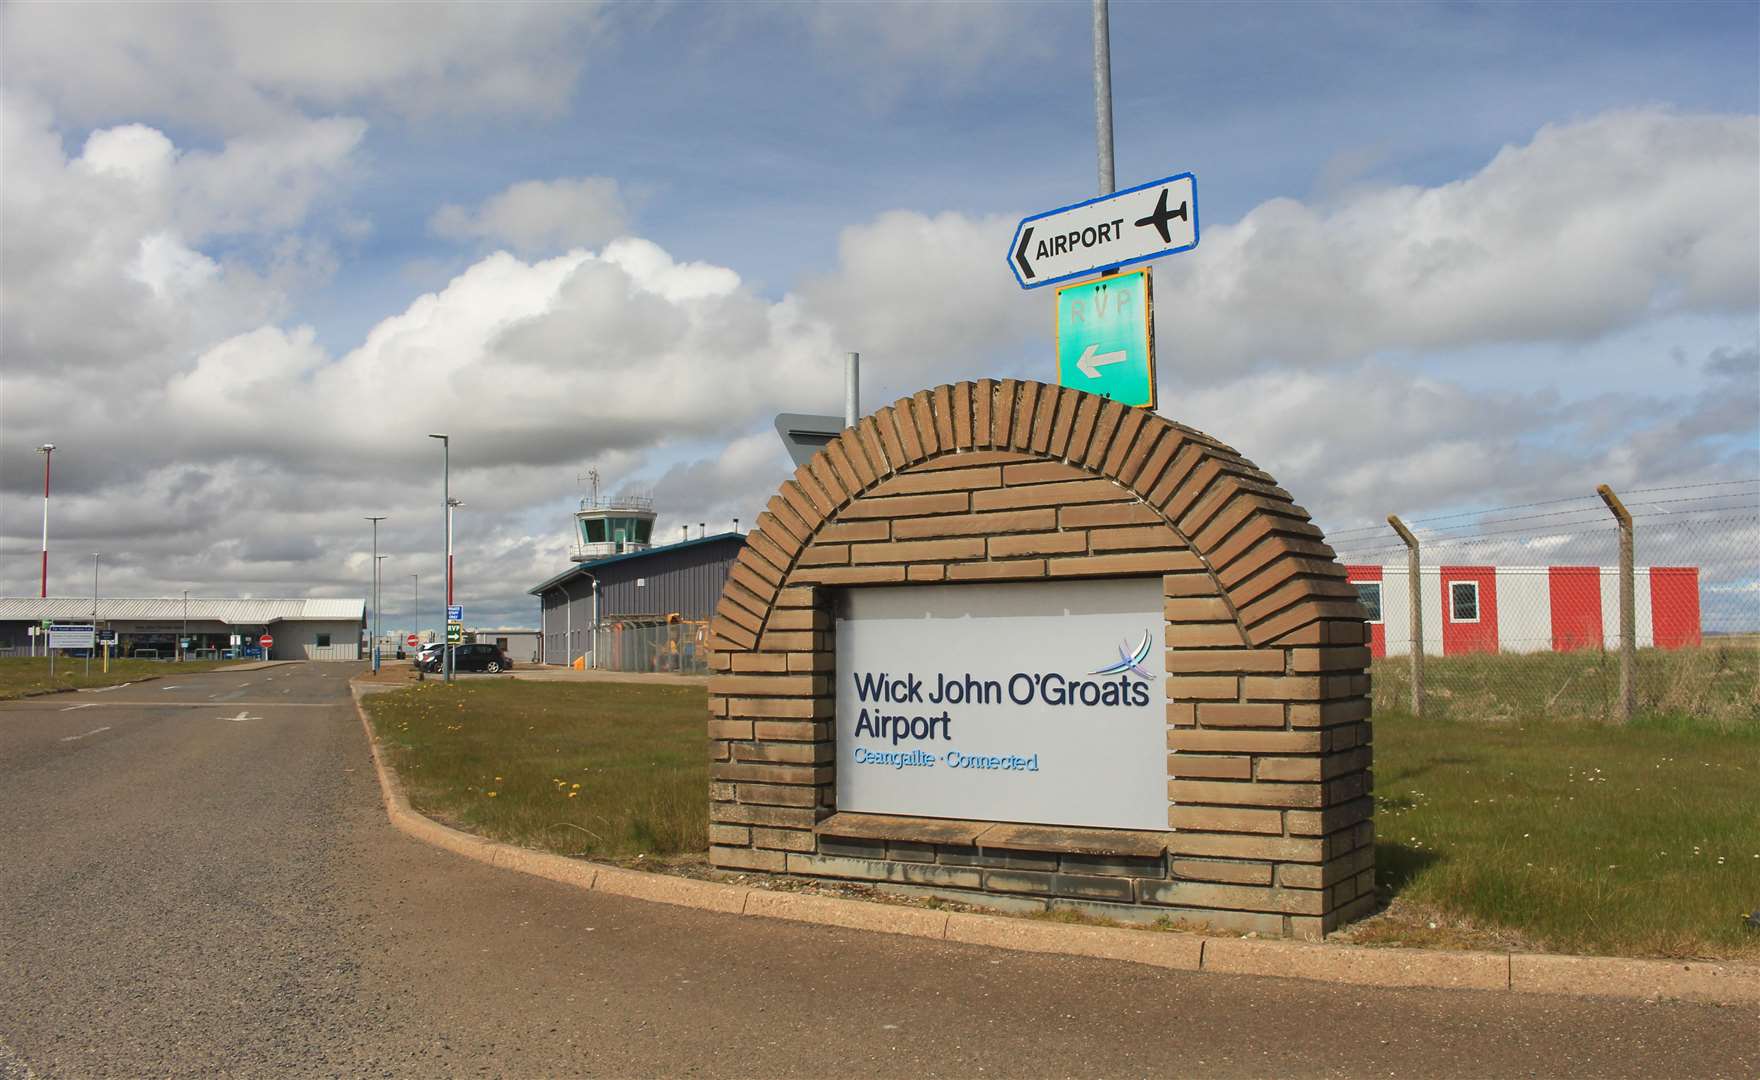 Wick John O'Groats Airport has seen a 25 per cent rise in passenger numbers.